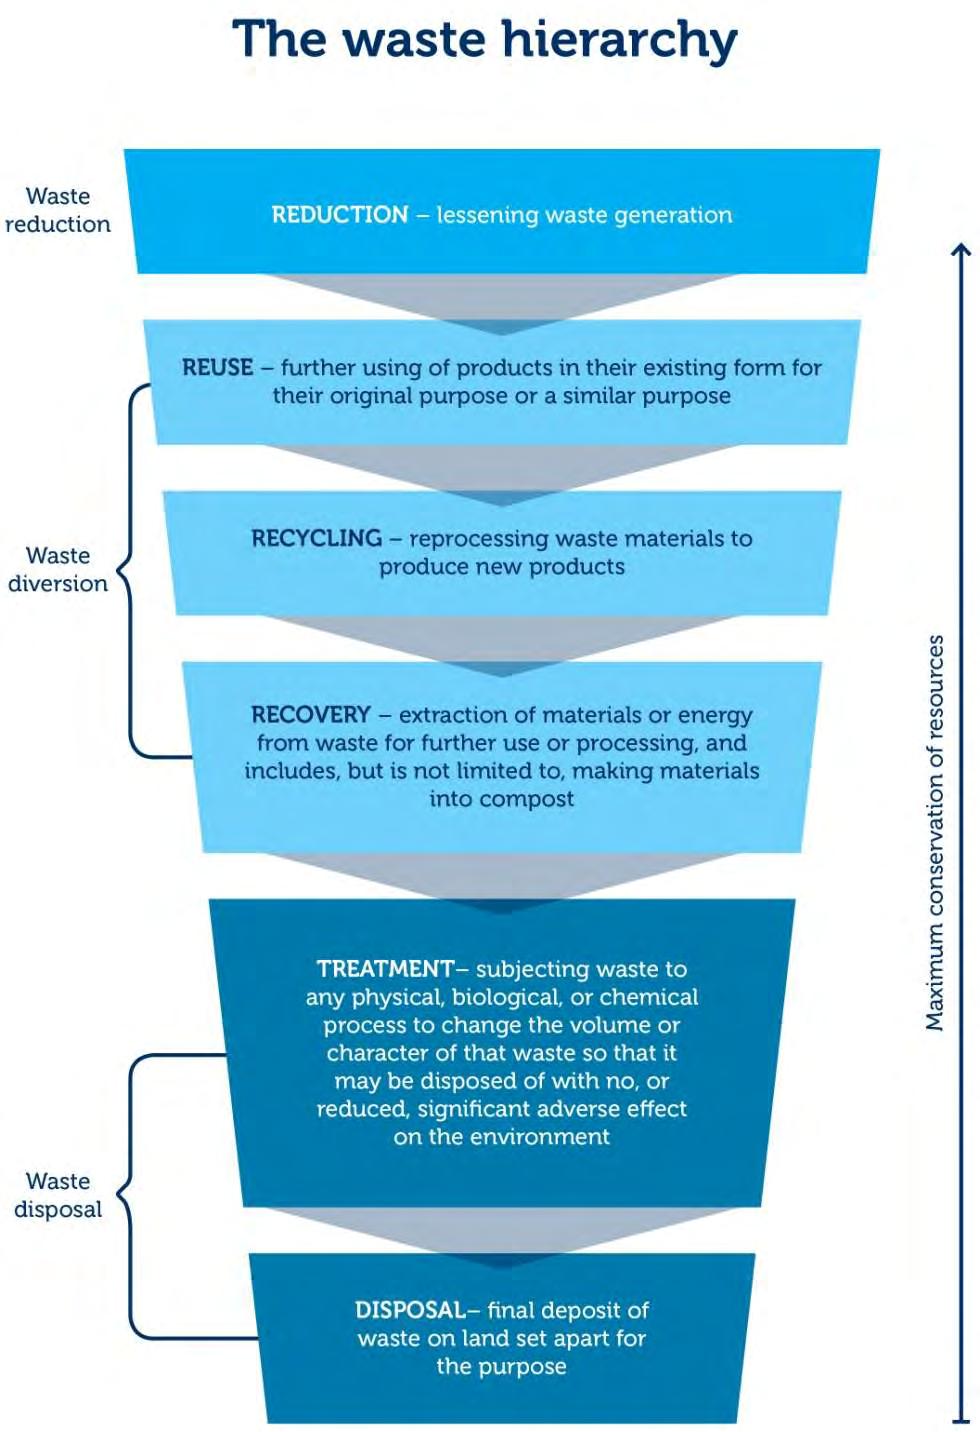 1.4.1 The waste hierarchy The waste hierarchy refers to the idea that reducing, reusing, recycling and recovering waste is preferable to disposal (which in New